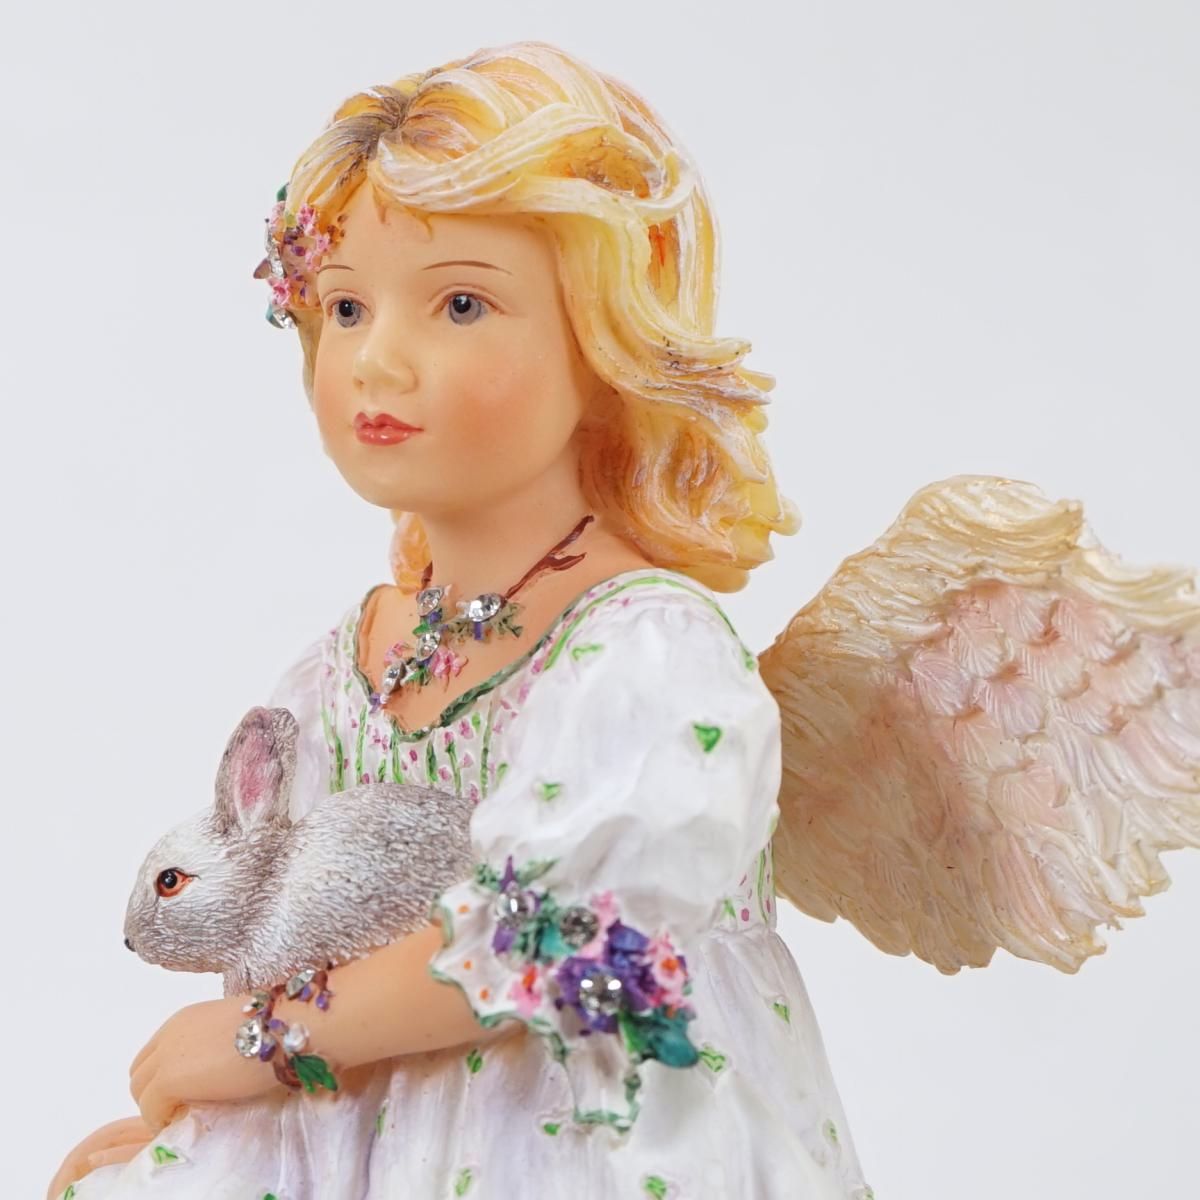 Crisalis Collection ★ Angel of Tenderness (1-497) Premium